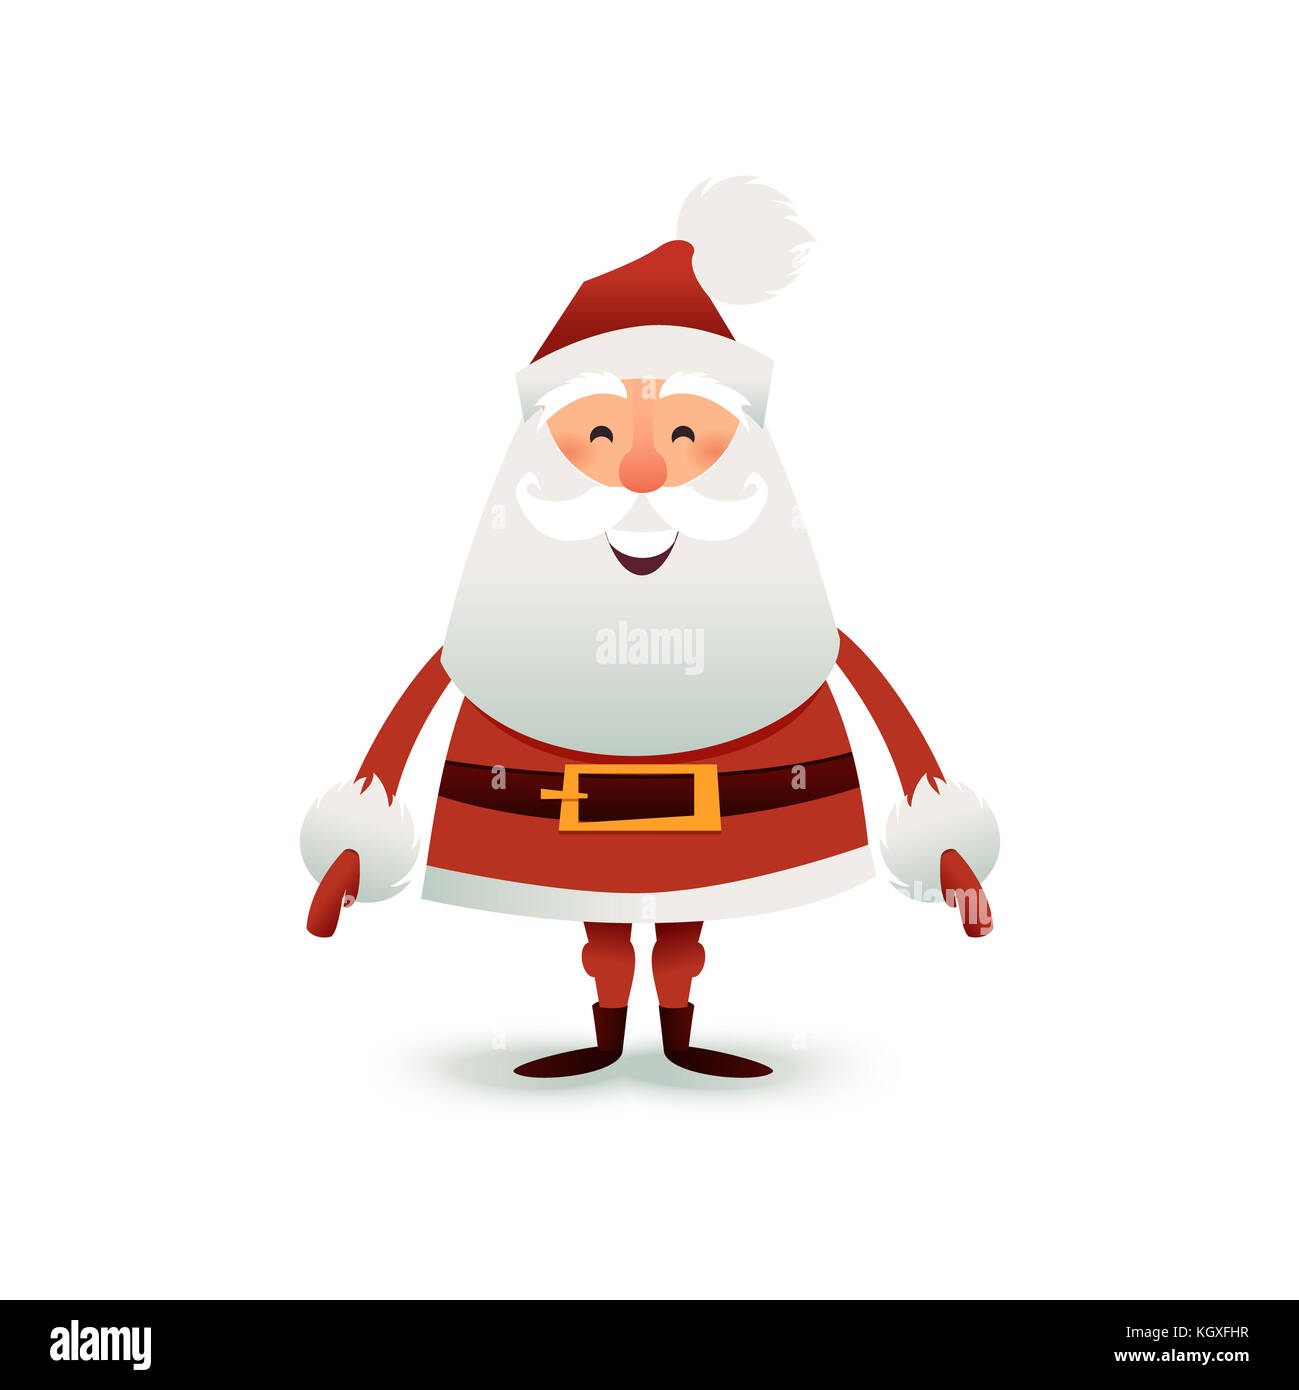 Santa Claus flat illustration. Happy Christmas father cartoon character. Cute X-mas character for Holiday design. New year Greeting Card for invitation, congratulation. Stock Photo